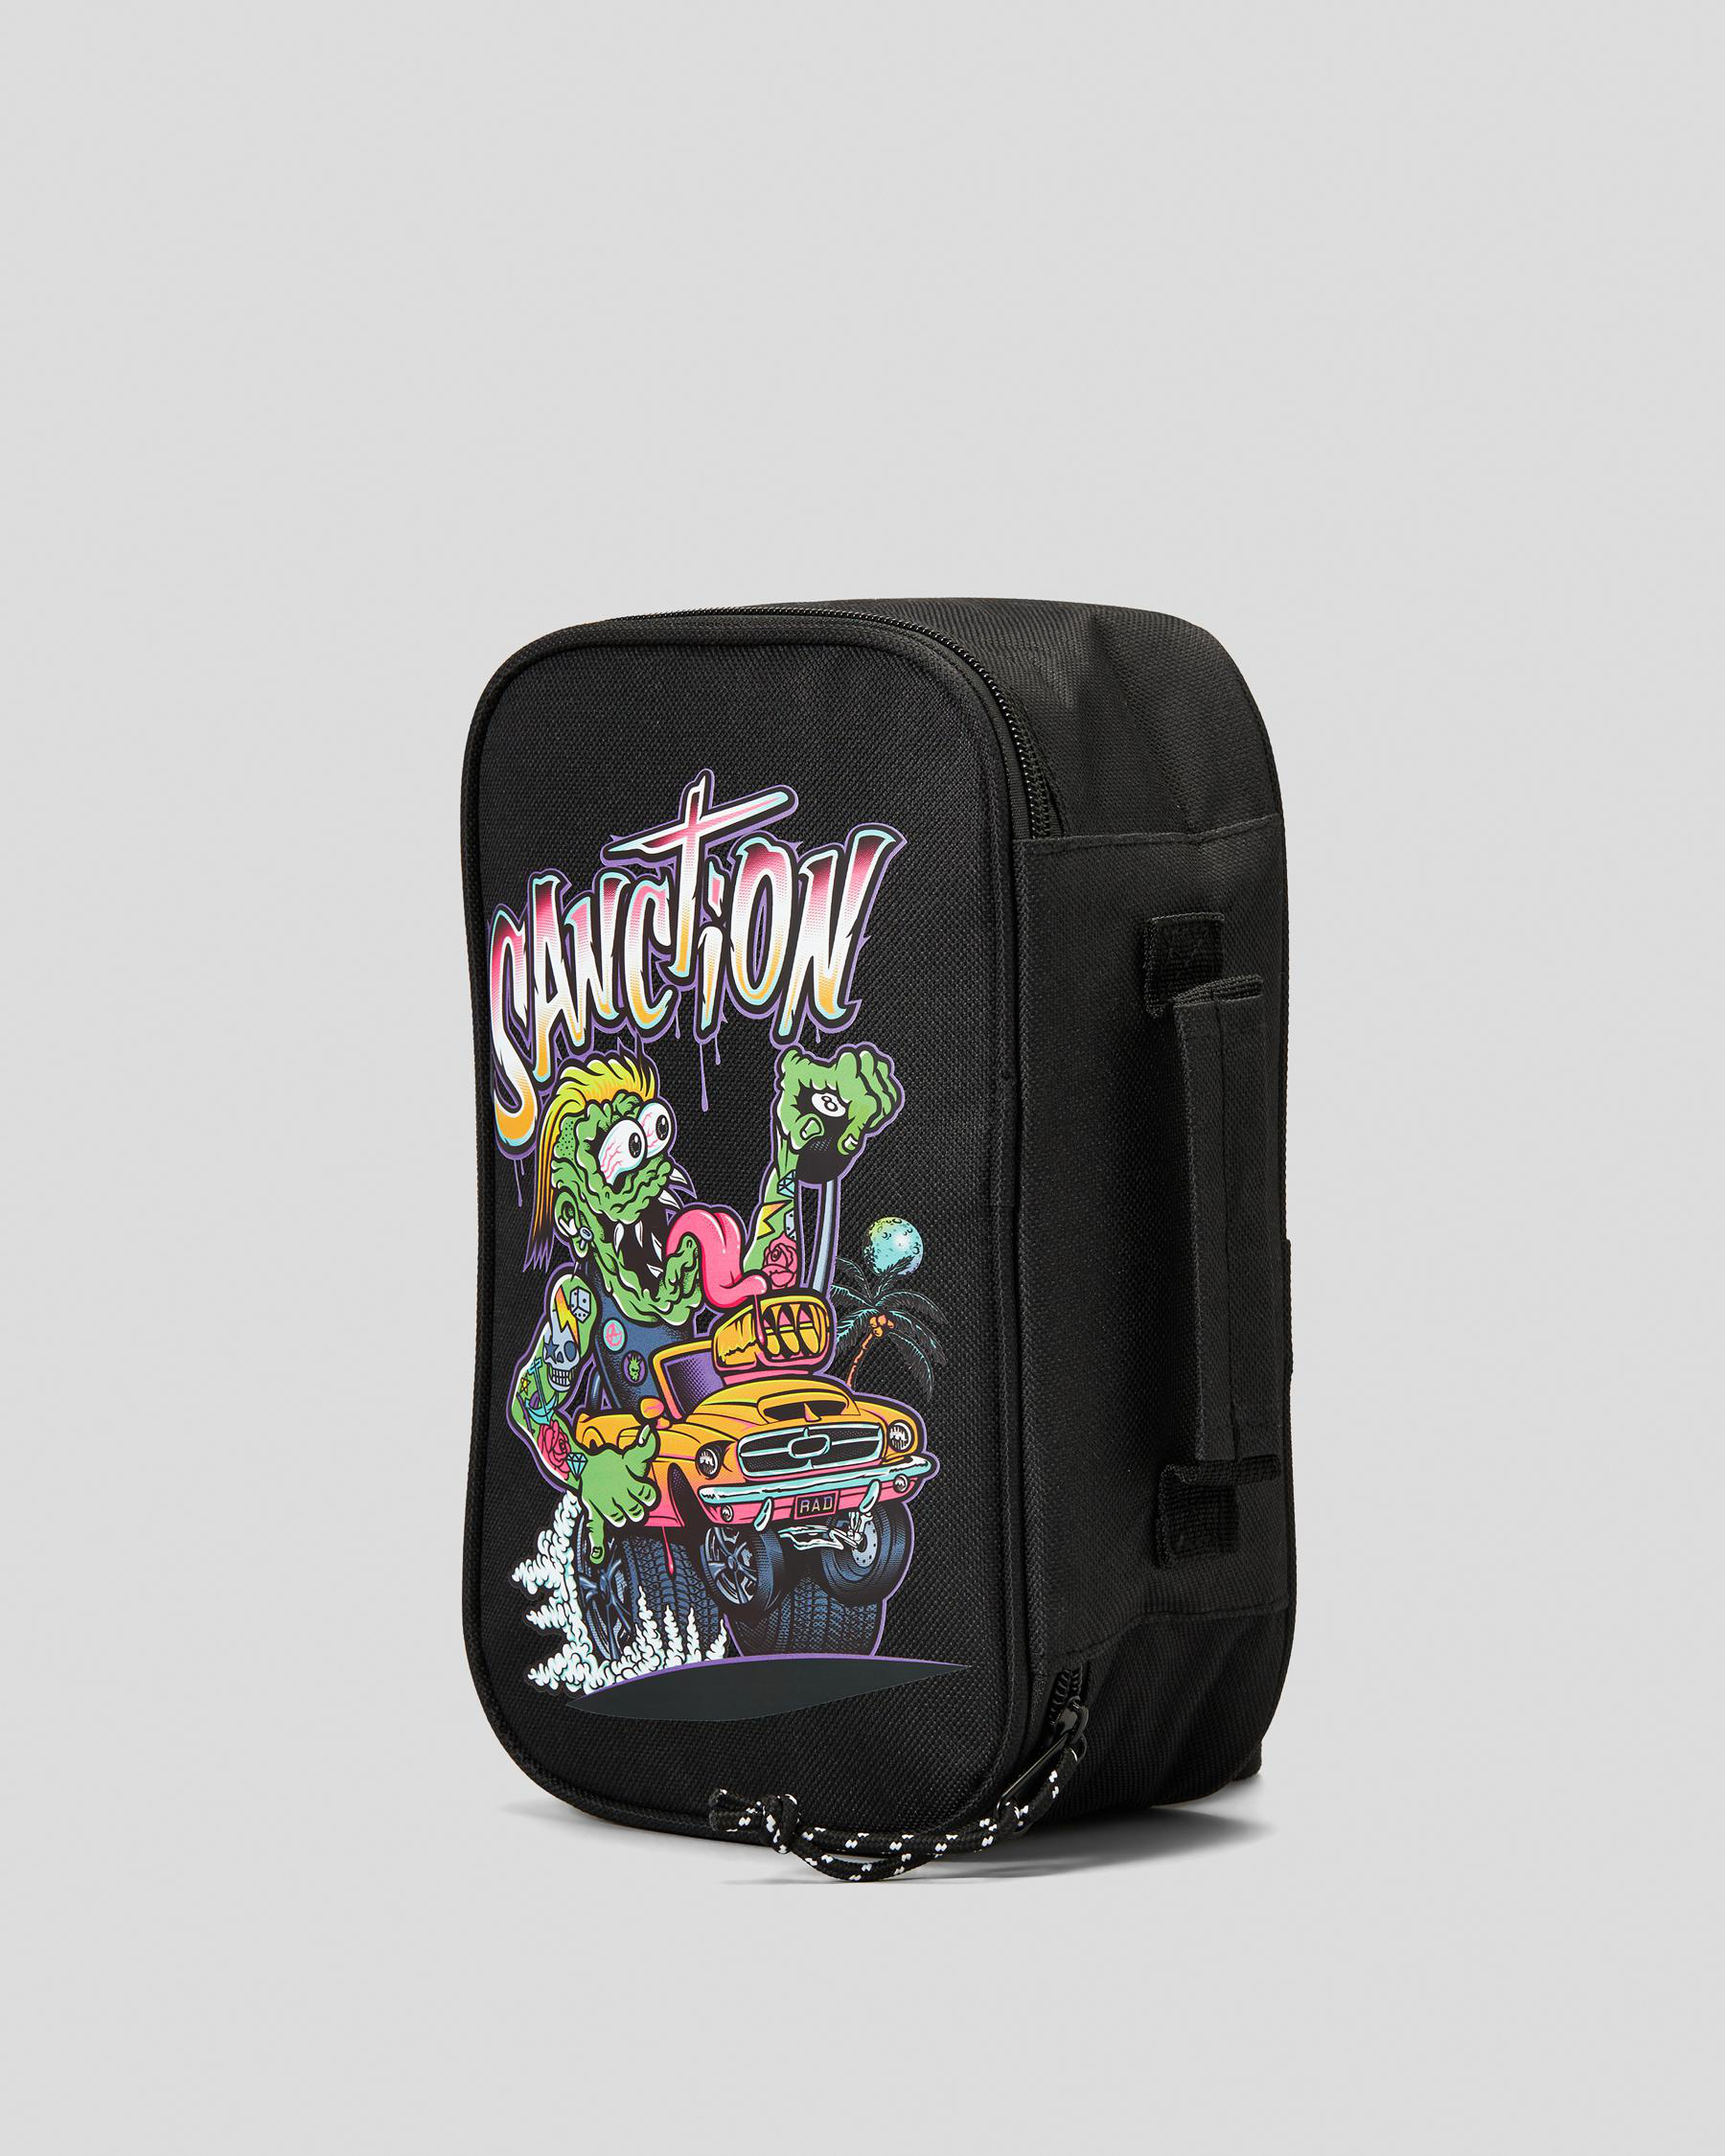 Sanction Night Rider Lunch Box In Black - Fast Shipping & Easy Returns ...